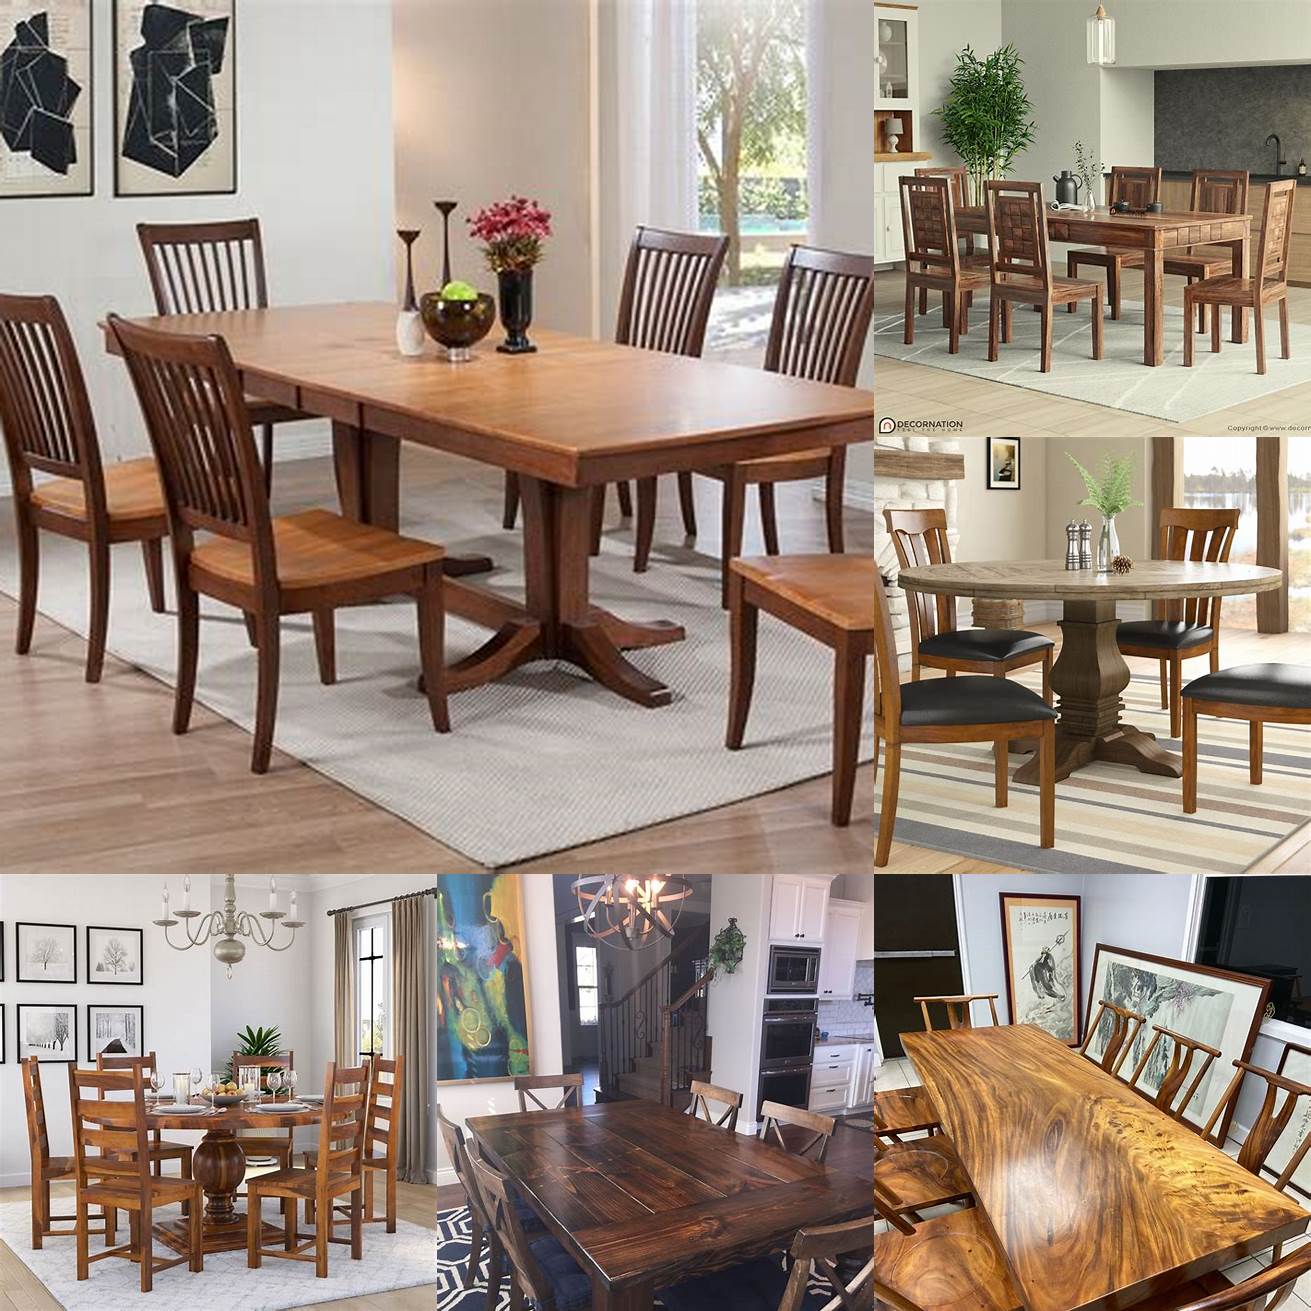 2 A solid wood dining table with intricate detailing and a classic design